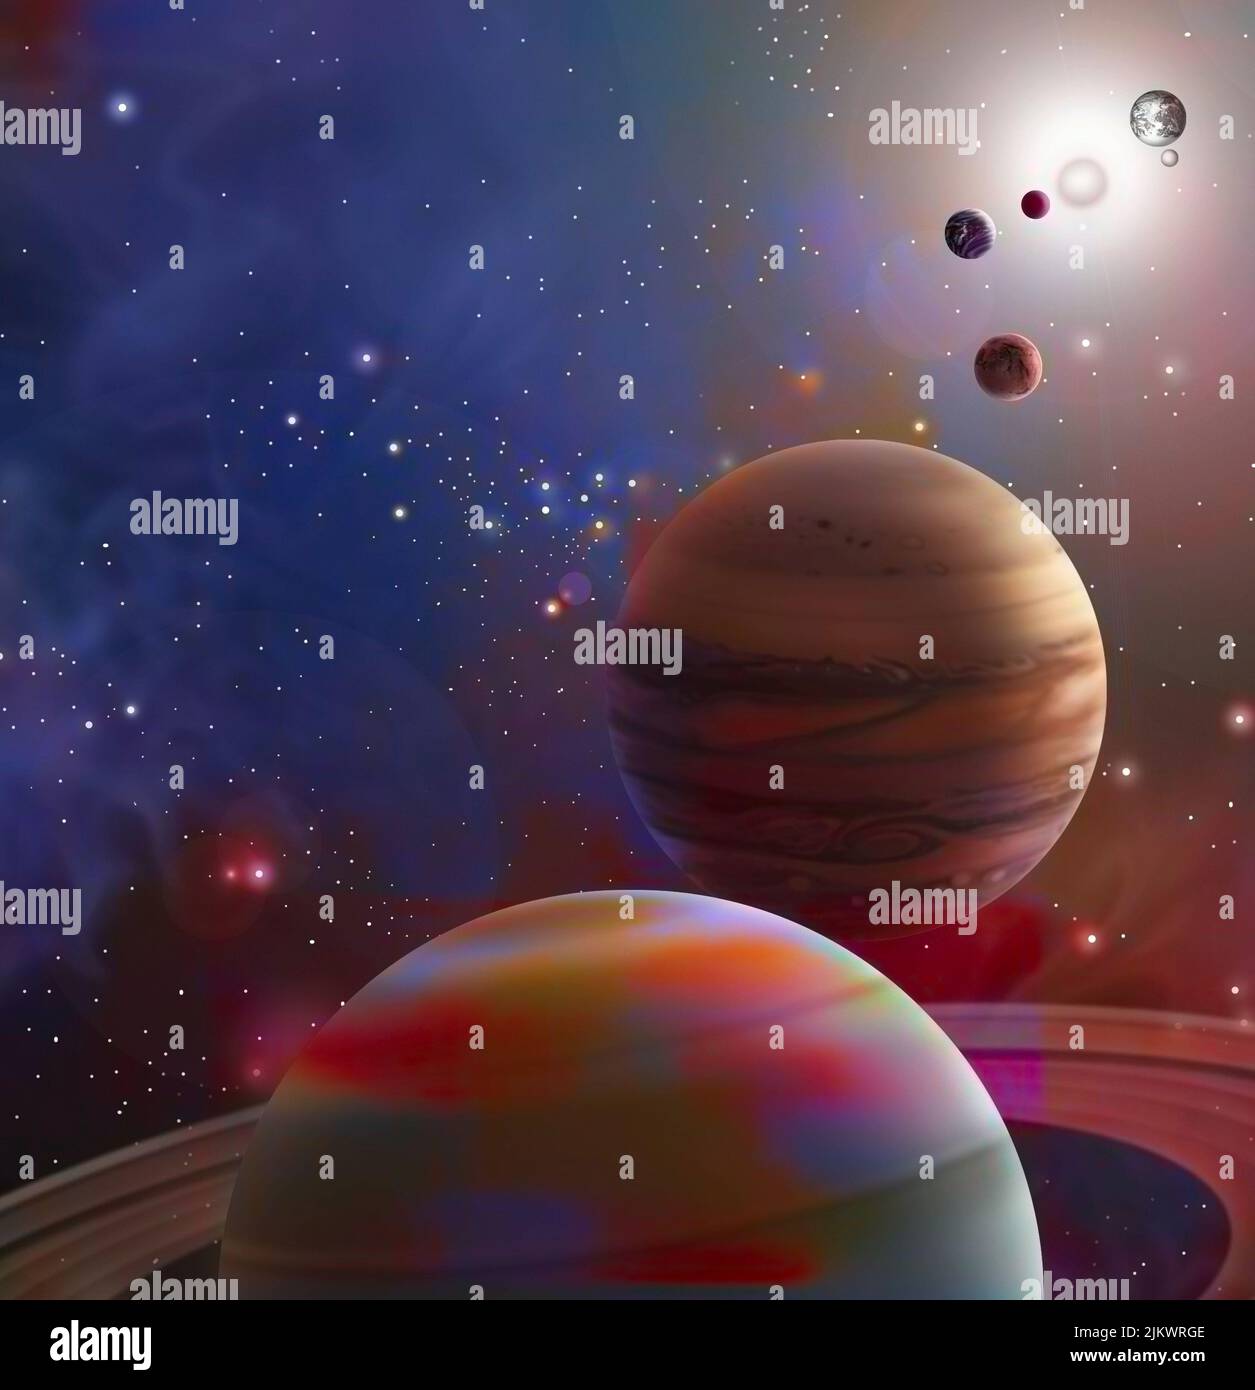 Alignment of the planets planned by astrologers for May 5, 2000. Stock Photo